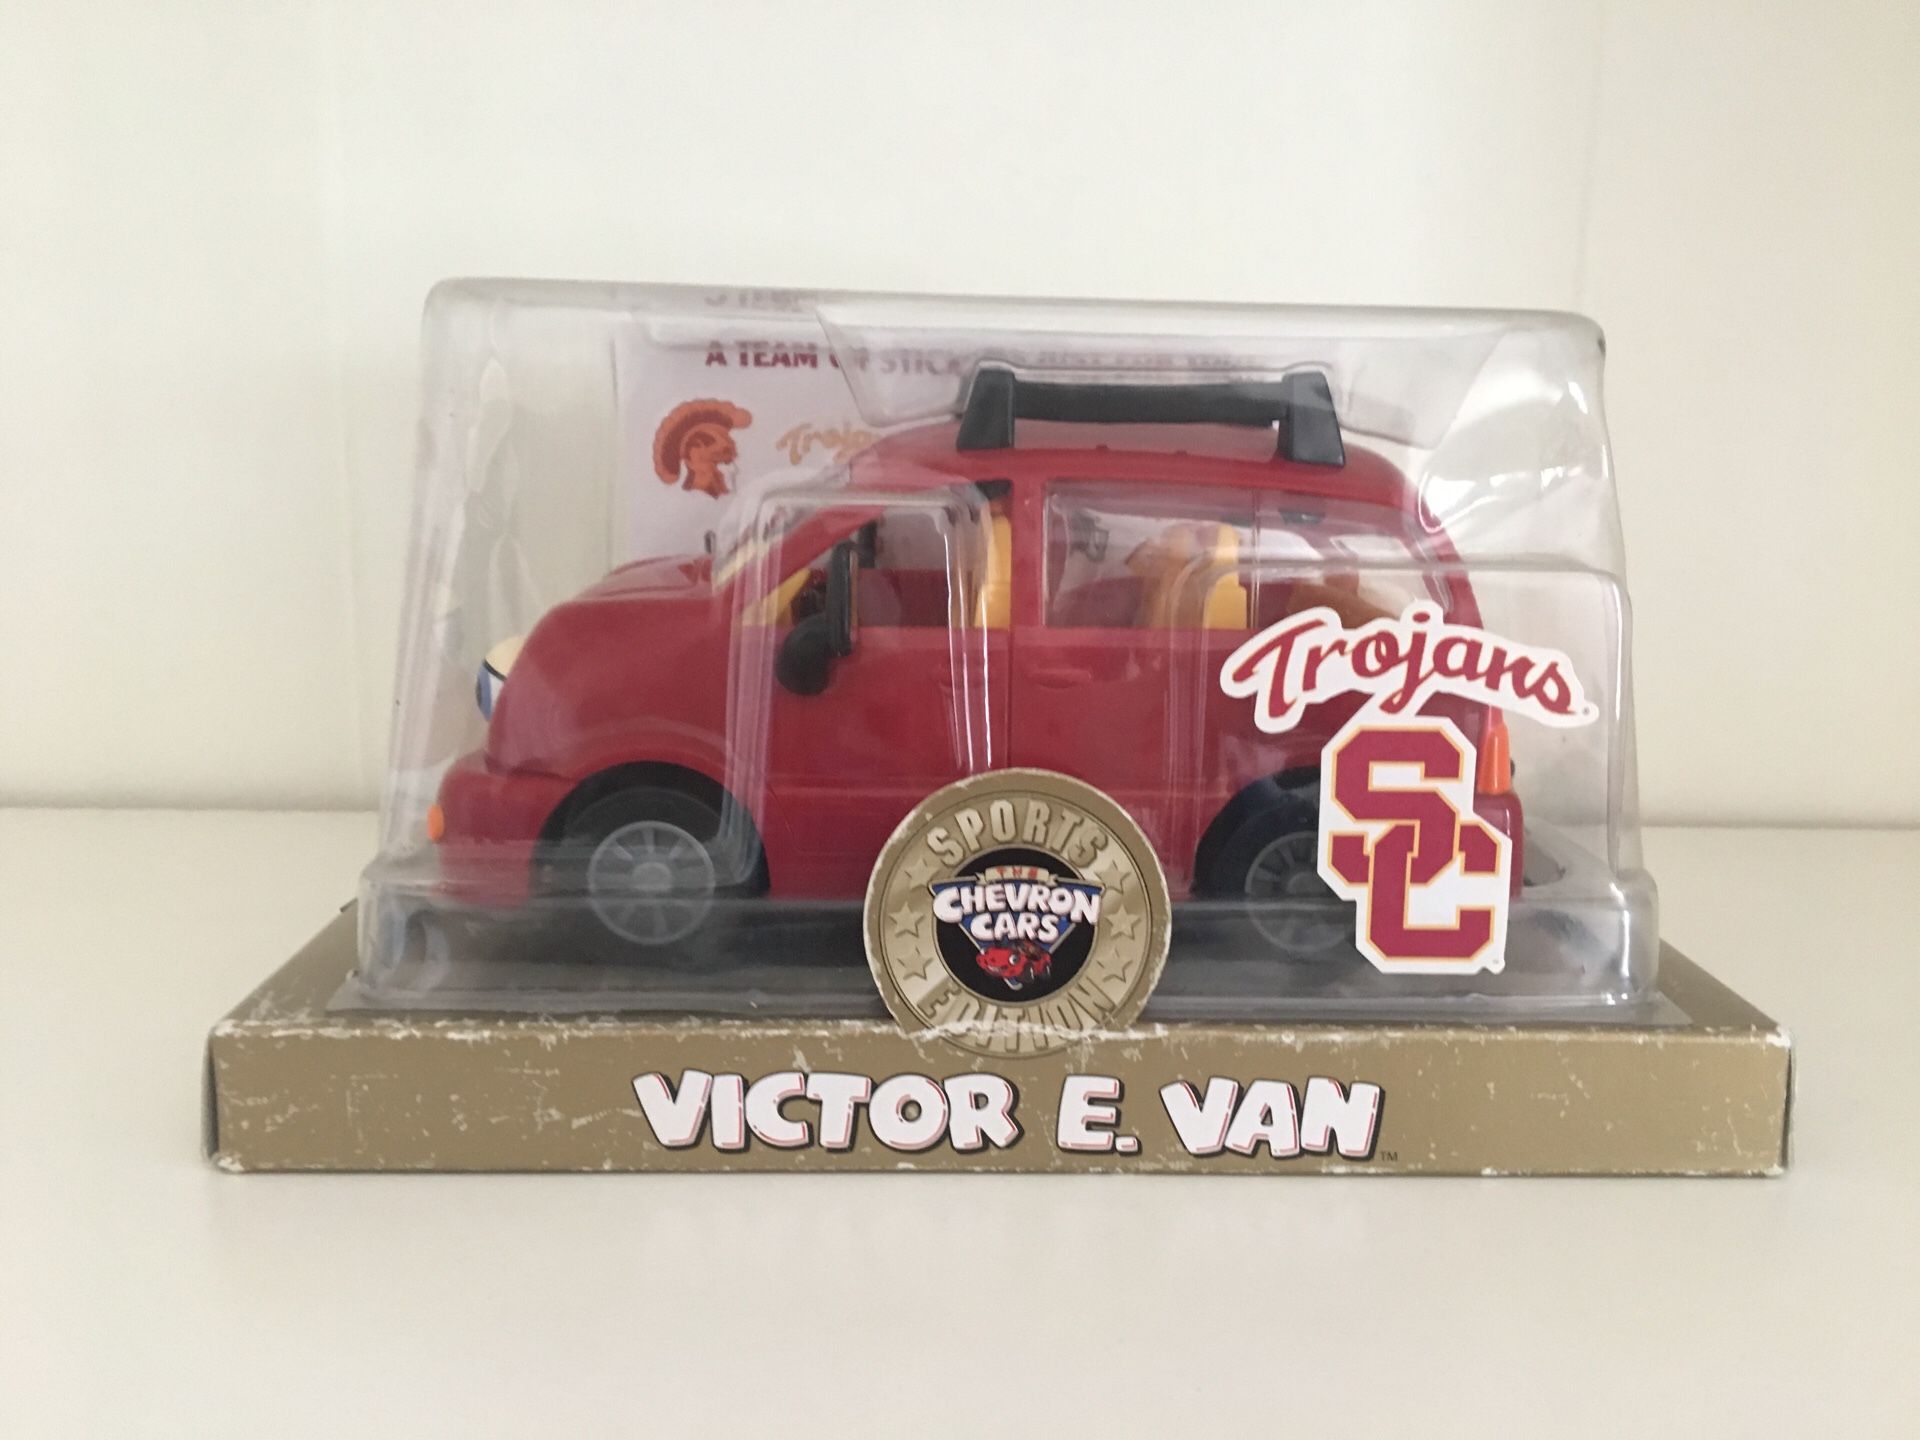 Trojans toy car collectible